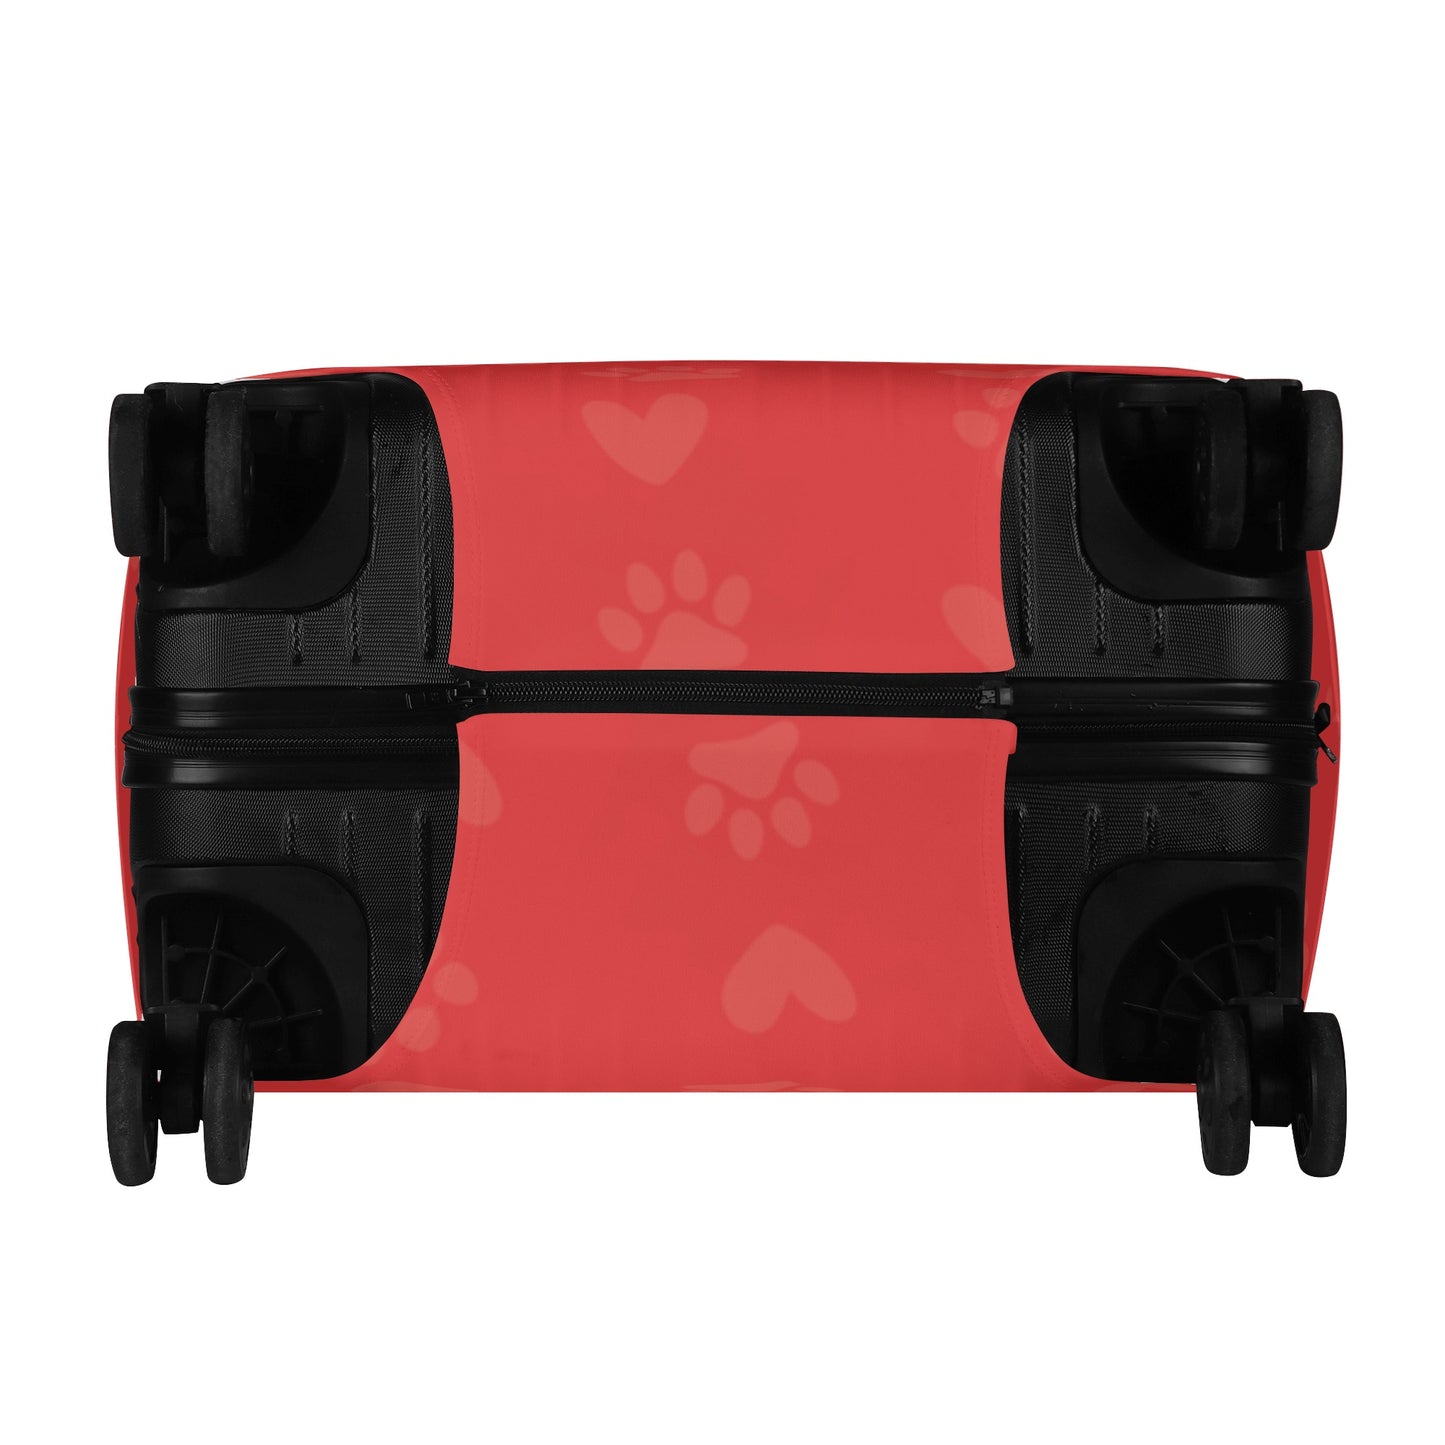 Sasha - Luggage Cover for Boston Terrier lovers